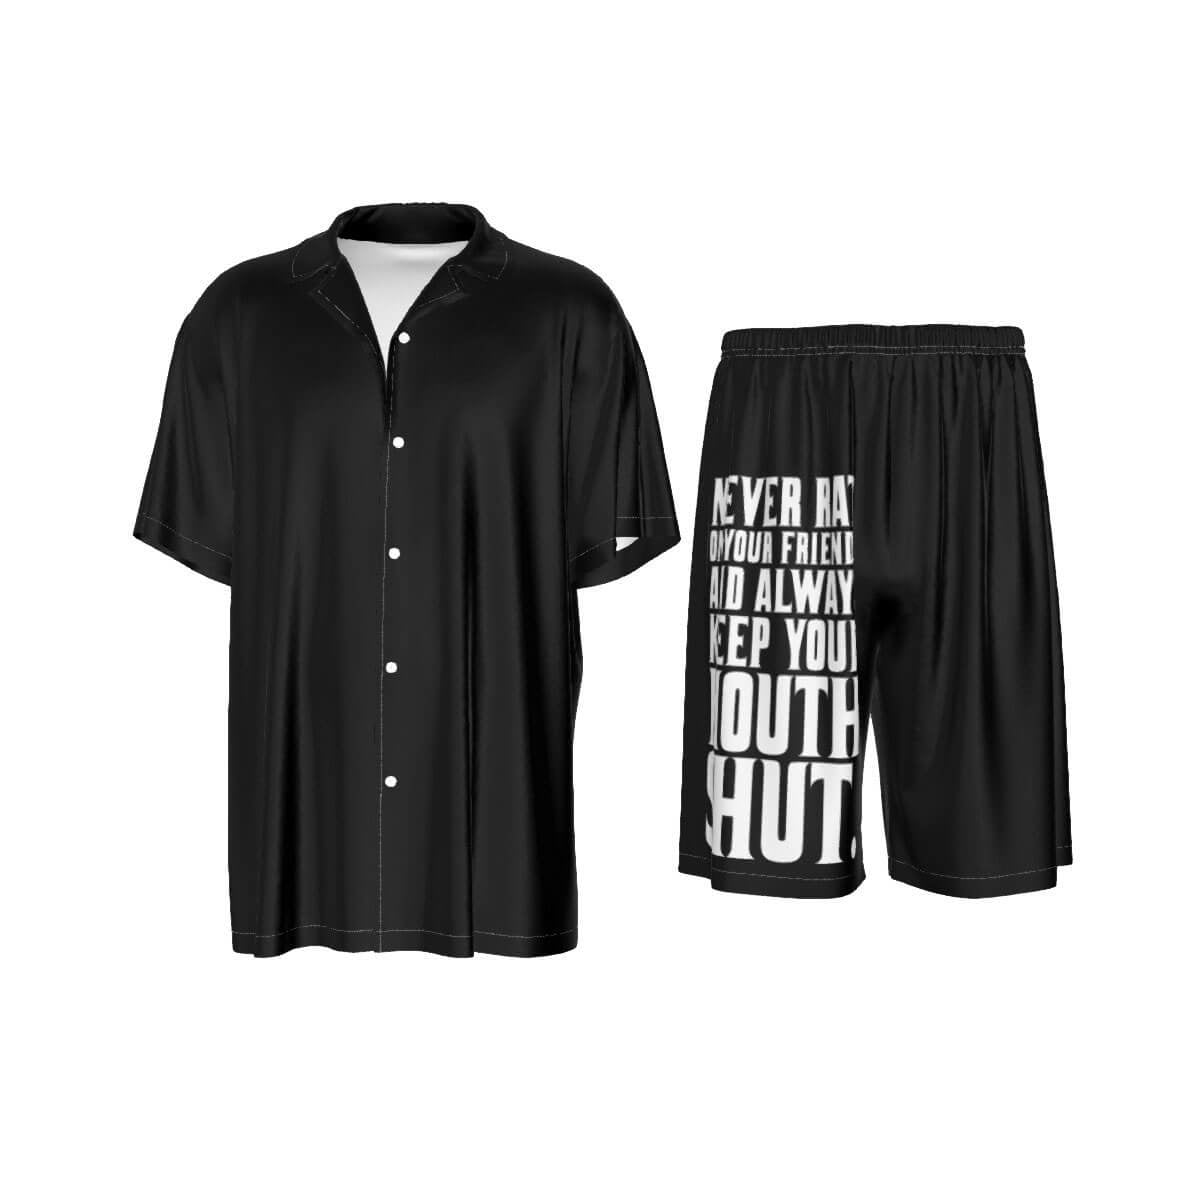 Never Rat on your Friends and Always Silk Shirt Suit Set